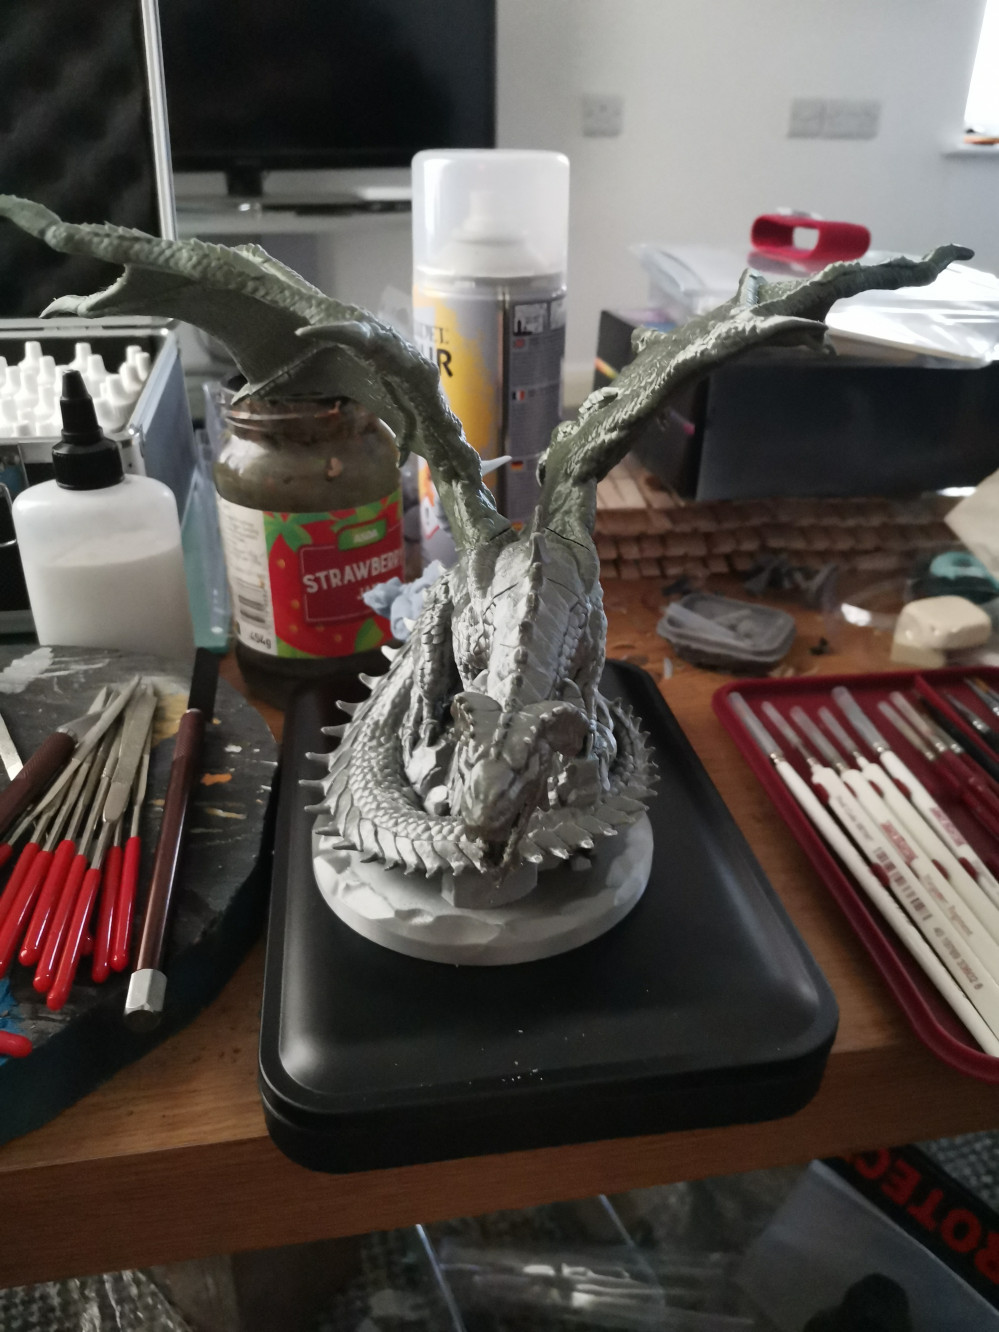 Advice on paints or airbrushing techniques for my drake